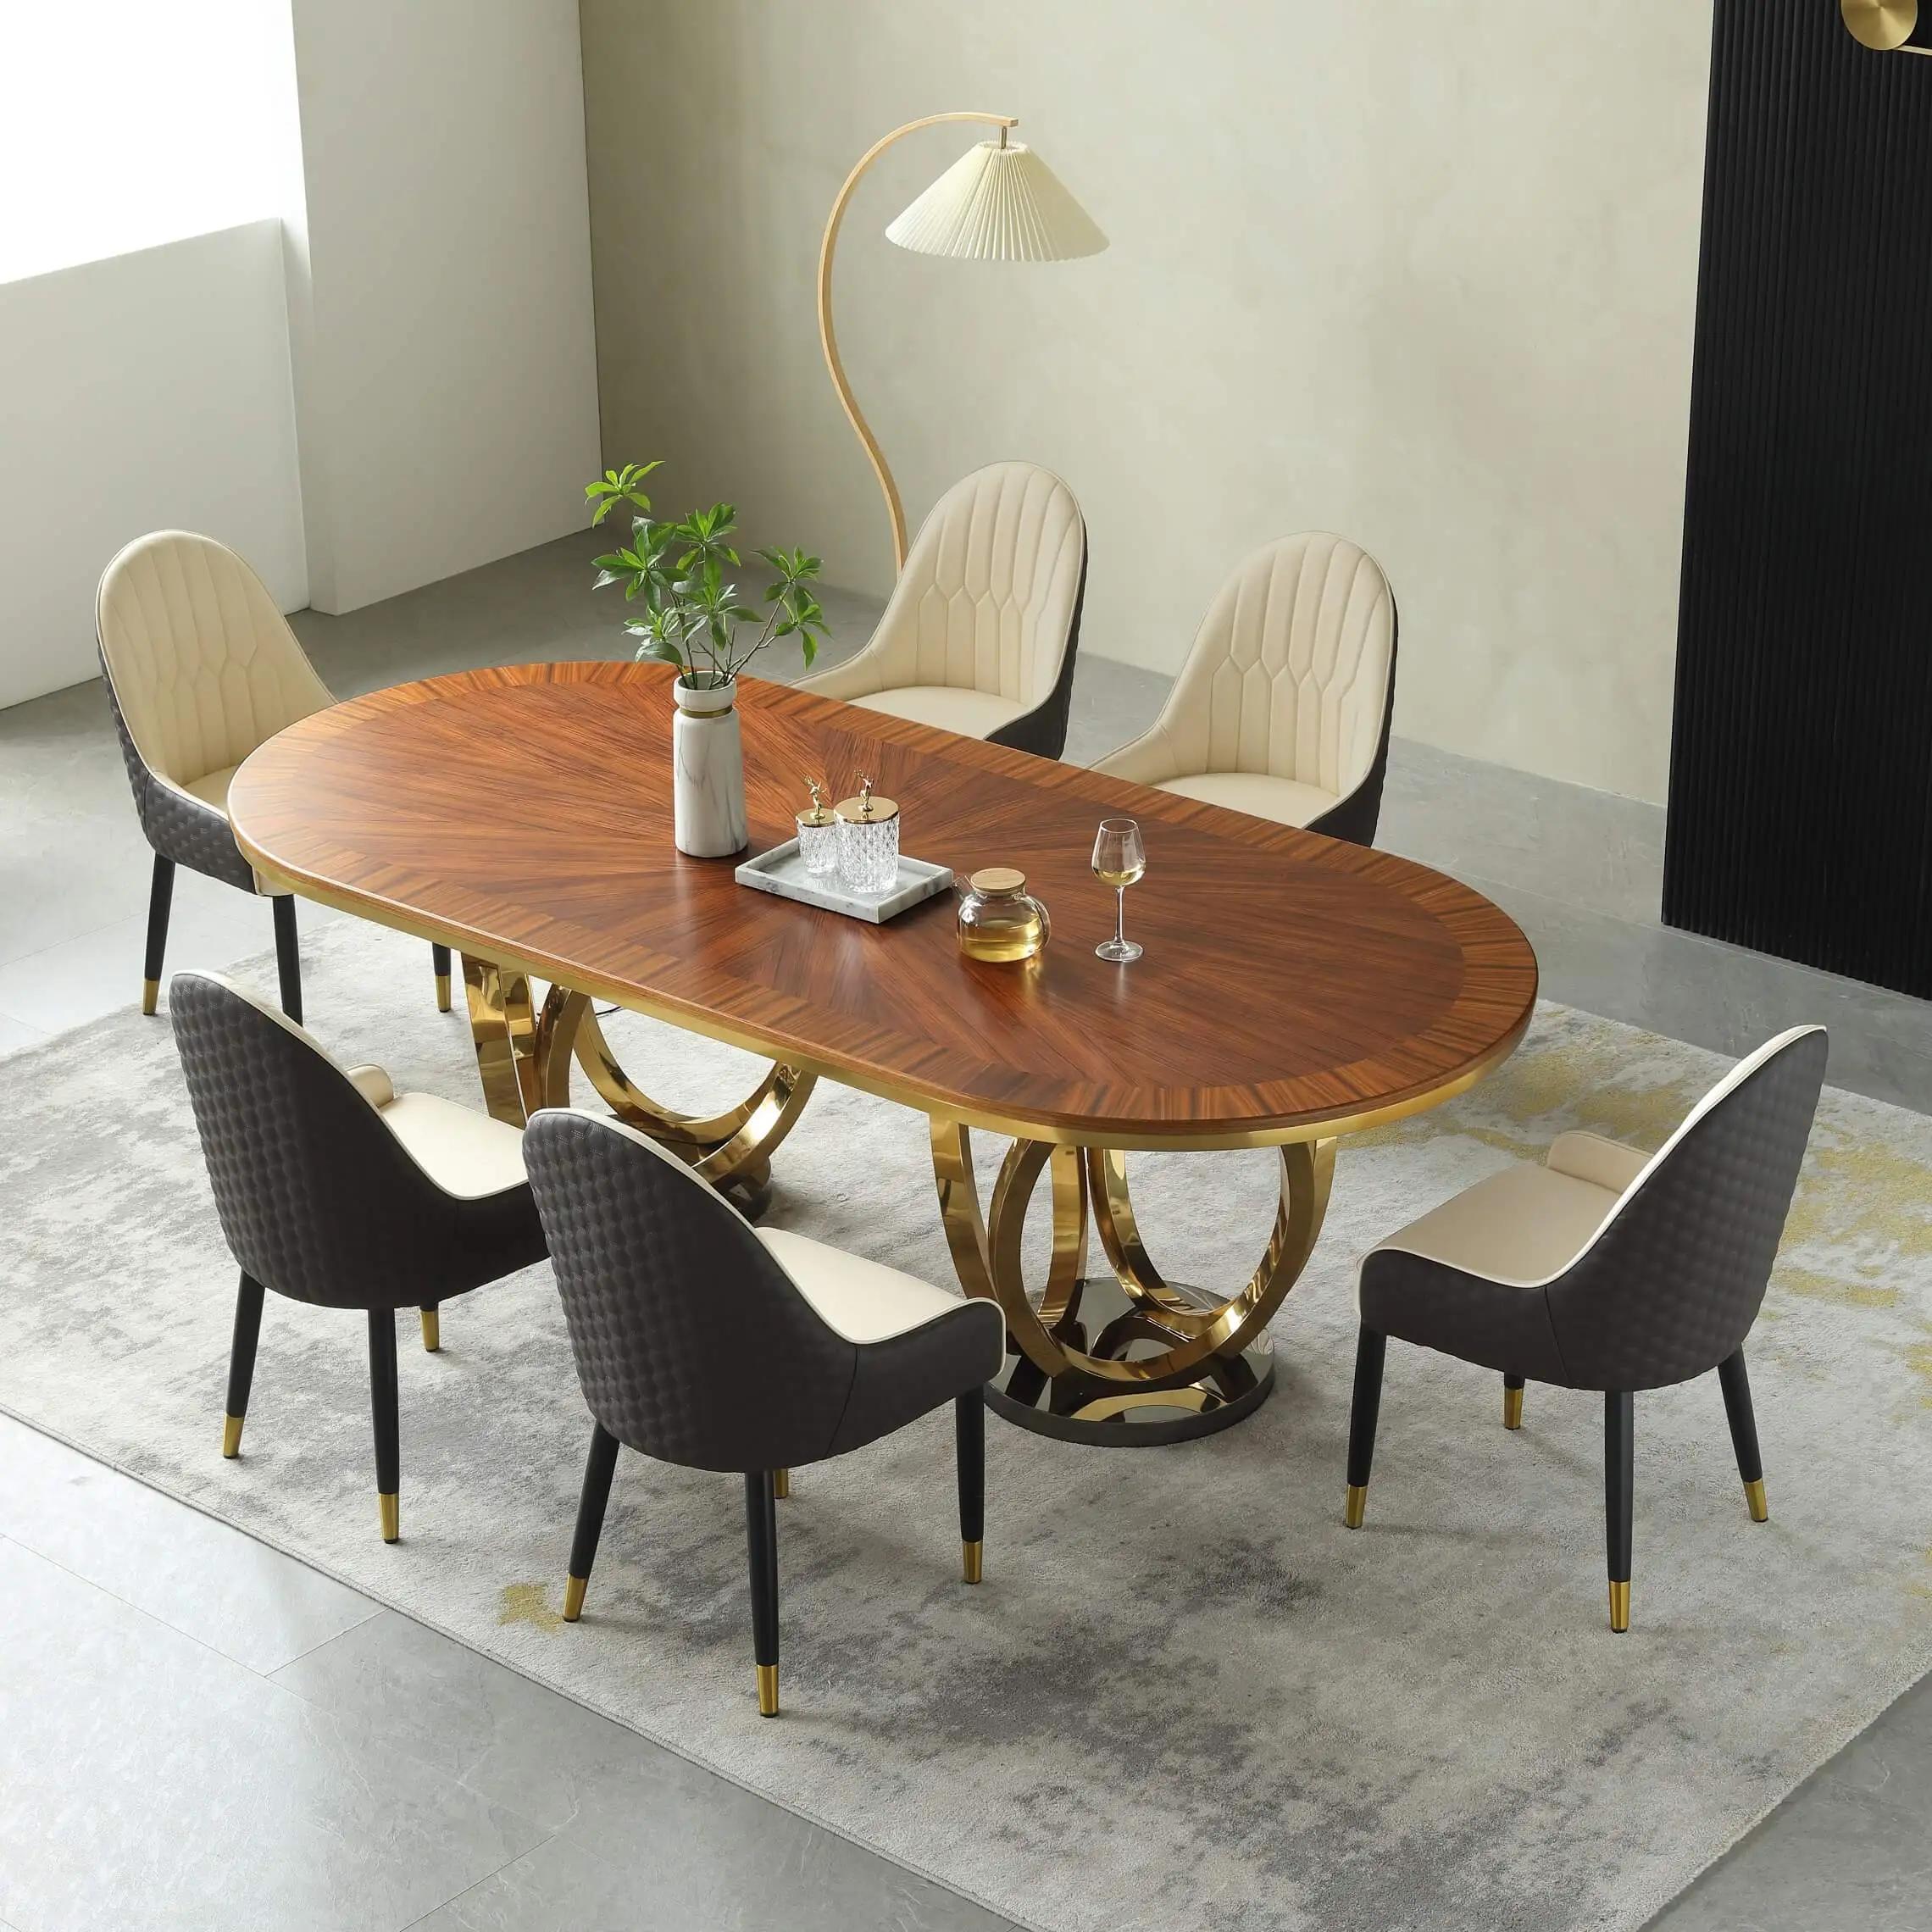 

    
Oval Dining Set 7Pcs w/ Beige & Chocolate Chairs GALAXY EUROPEAN FURNITURE
